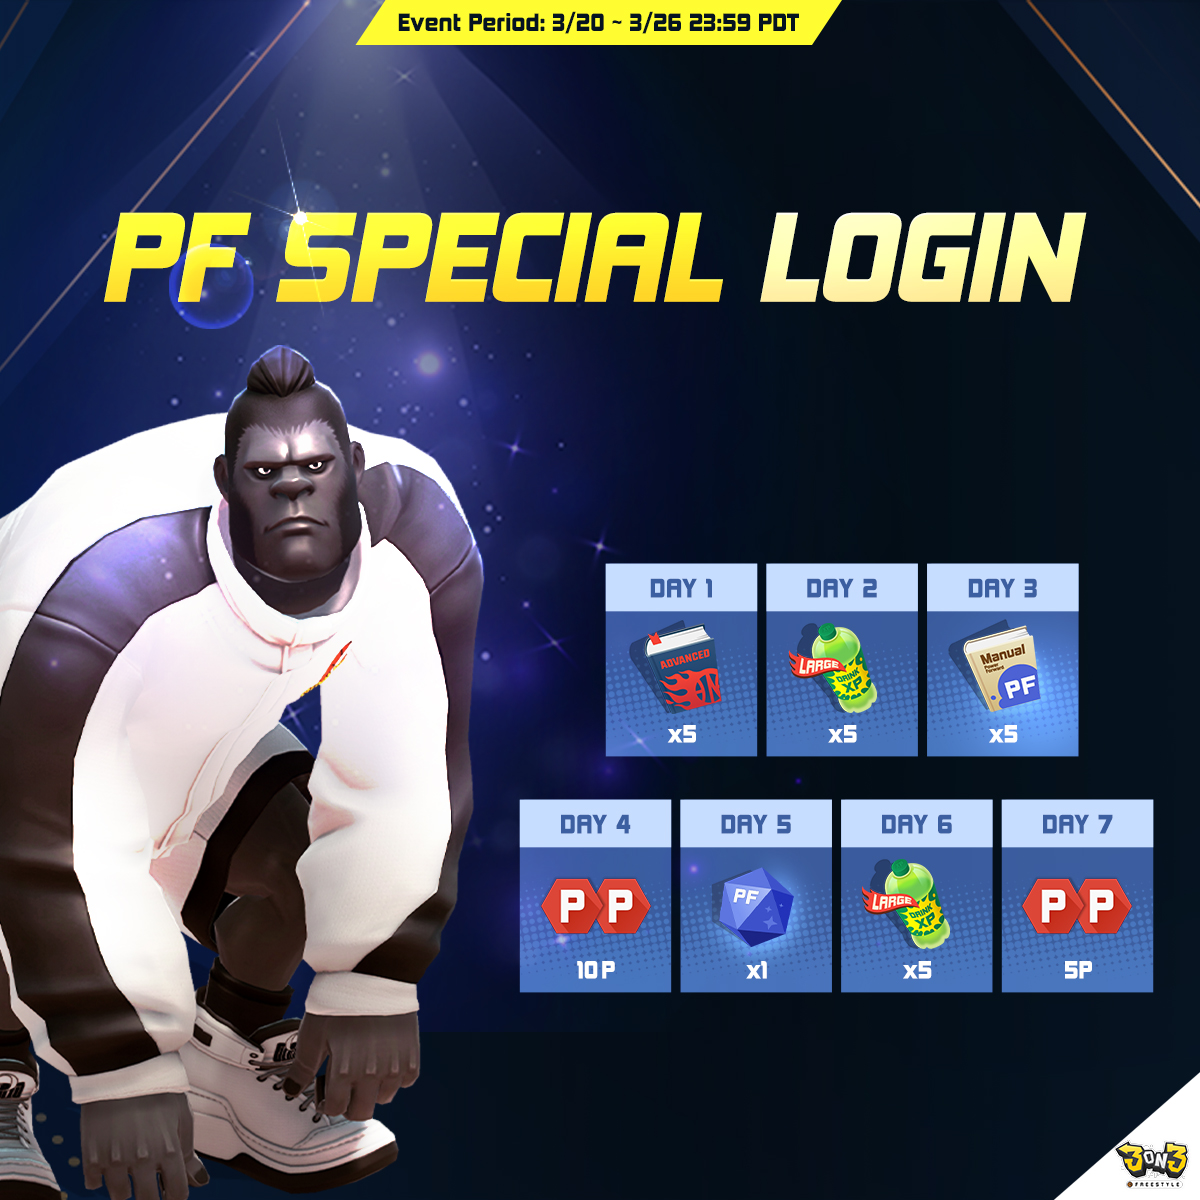 Don't miss out on our PF Special Login Event! Score big with exclusive rewards for a whole week! 📅 Event Period: March 20 - March 26, 23:59 (PDT). #videogame #StreetBasketball #3on3freestyle